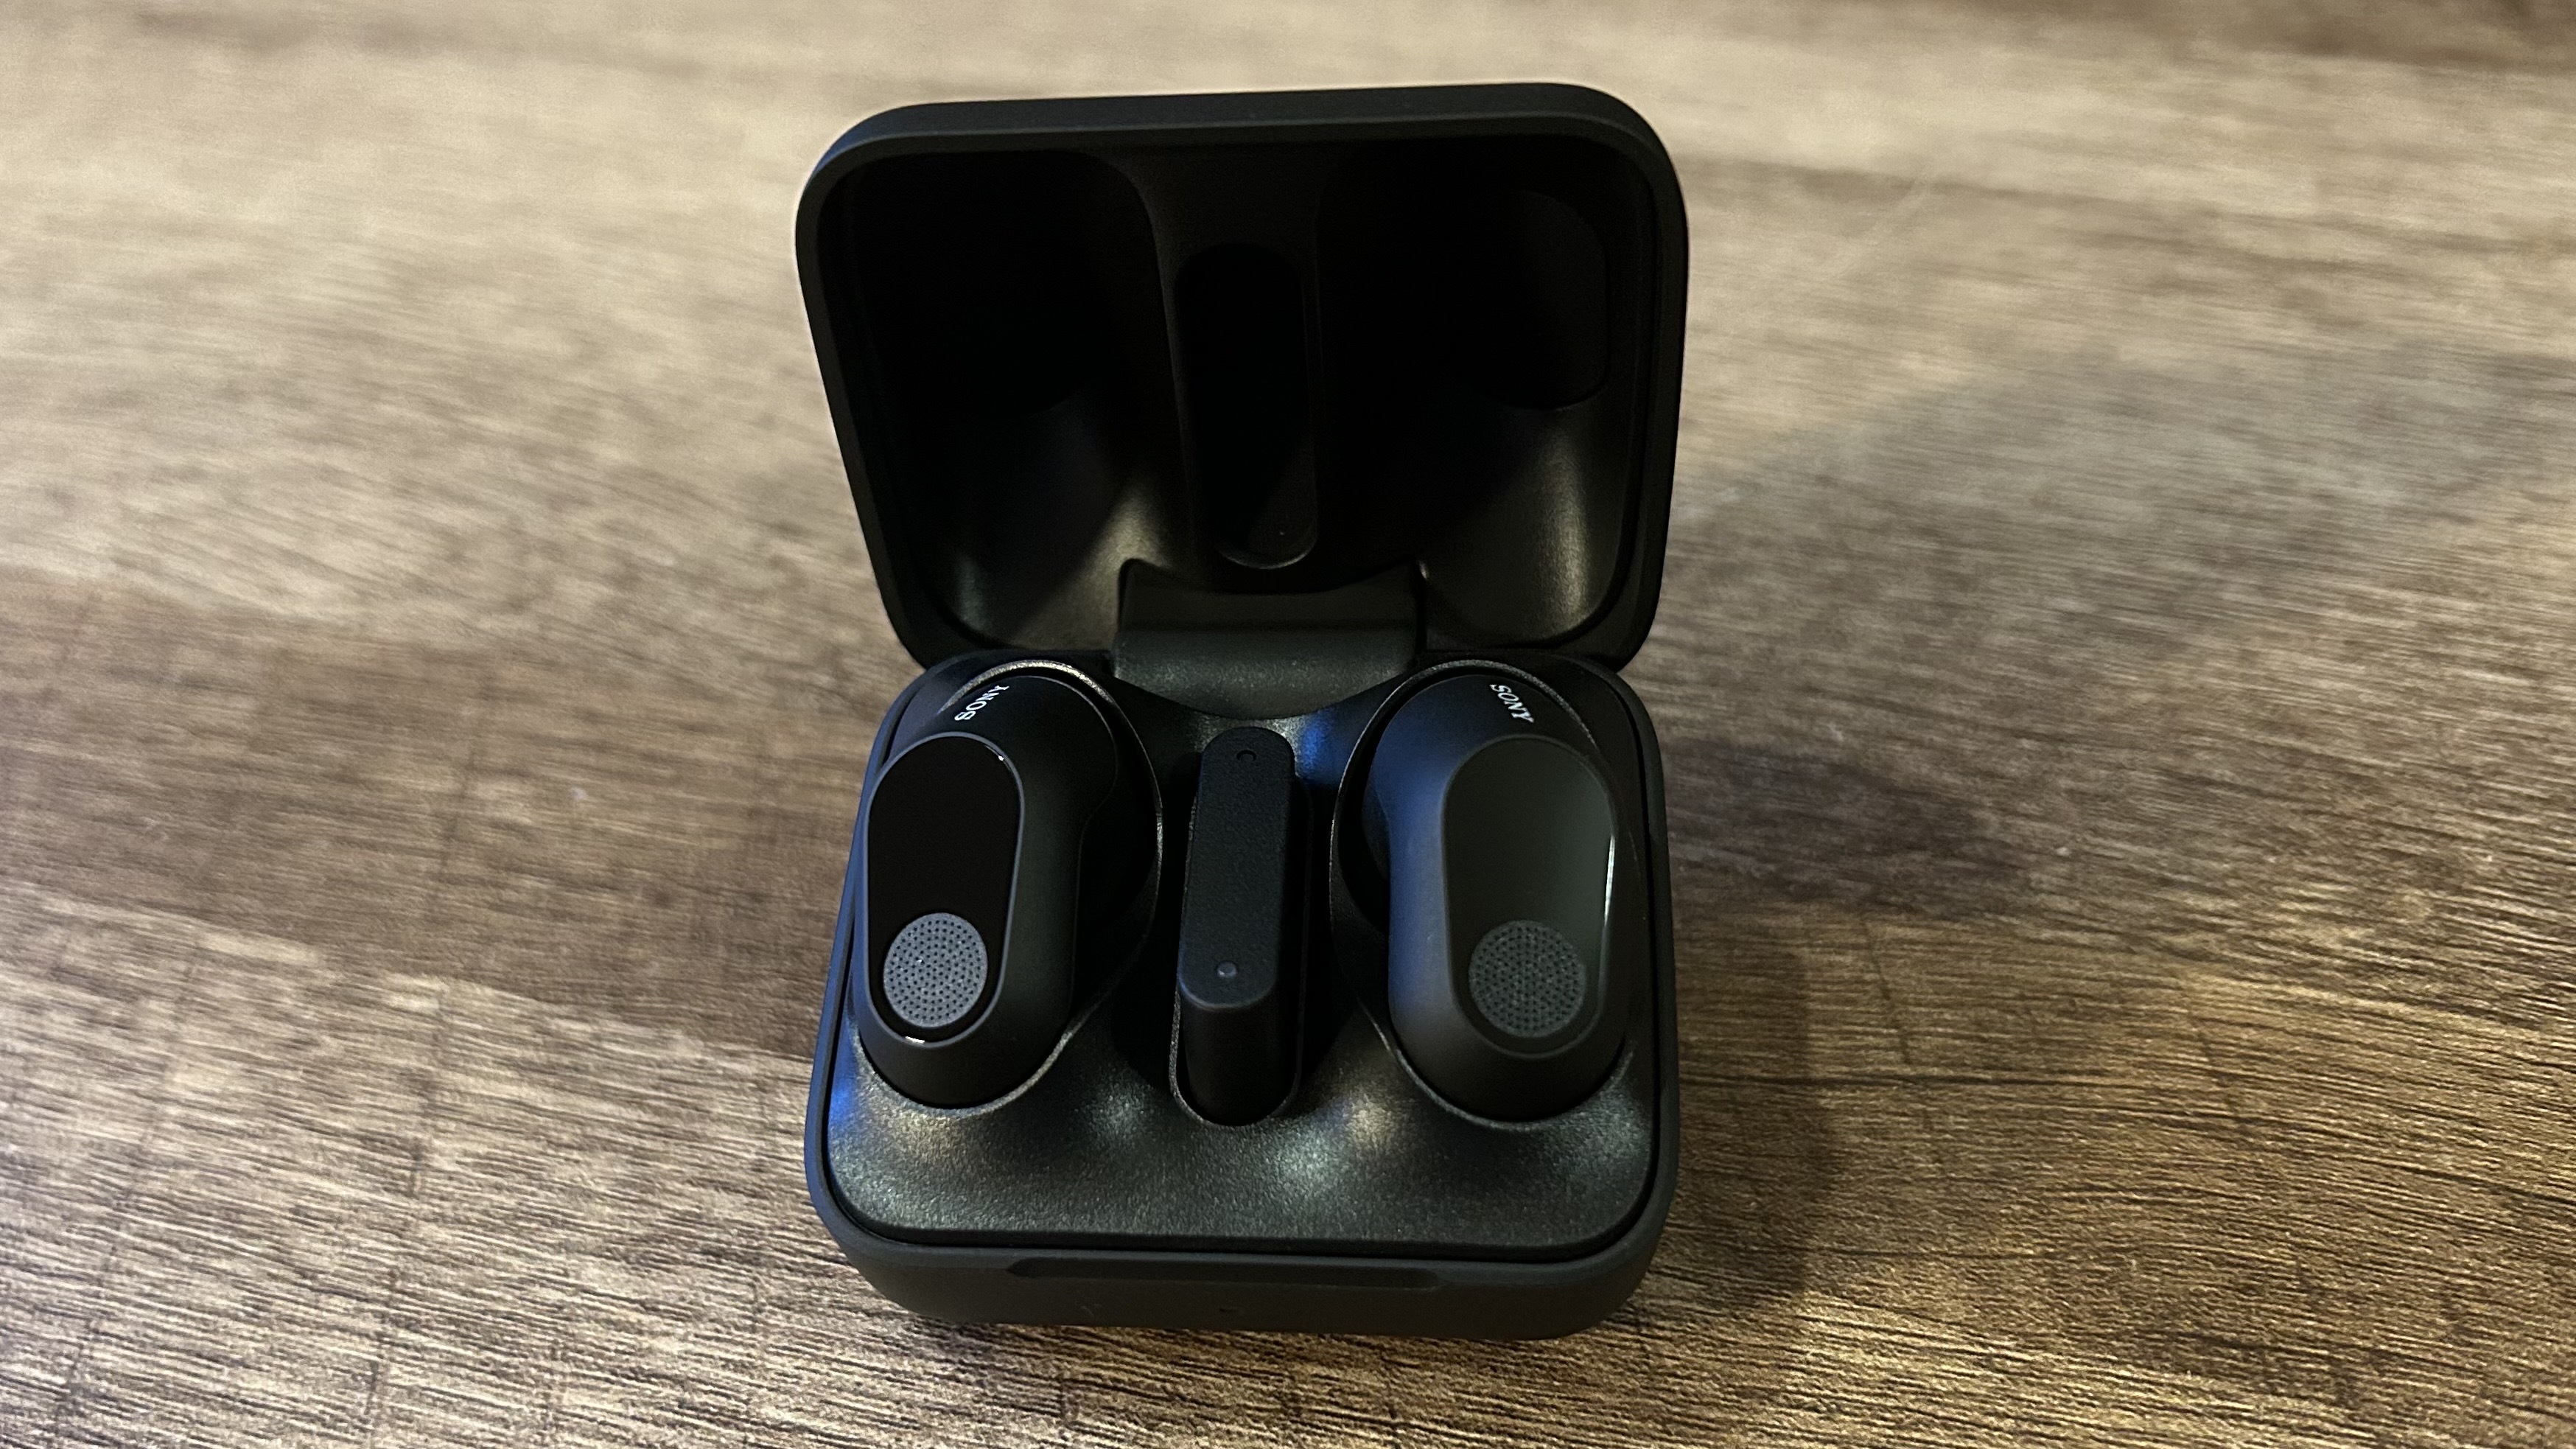 Sony Inzone Buds case open with earbuds inside on a wooden table